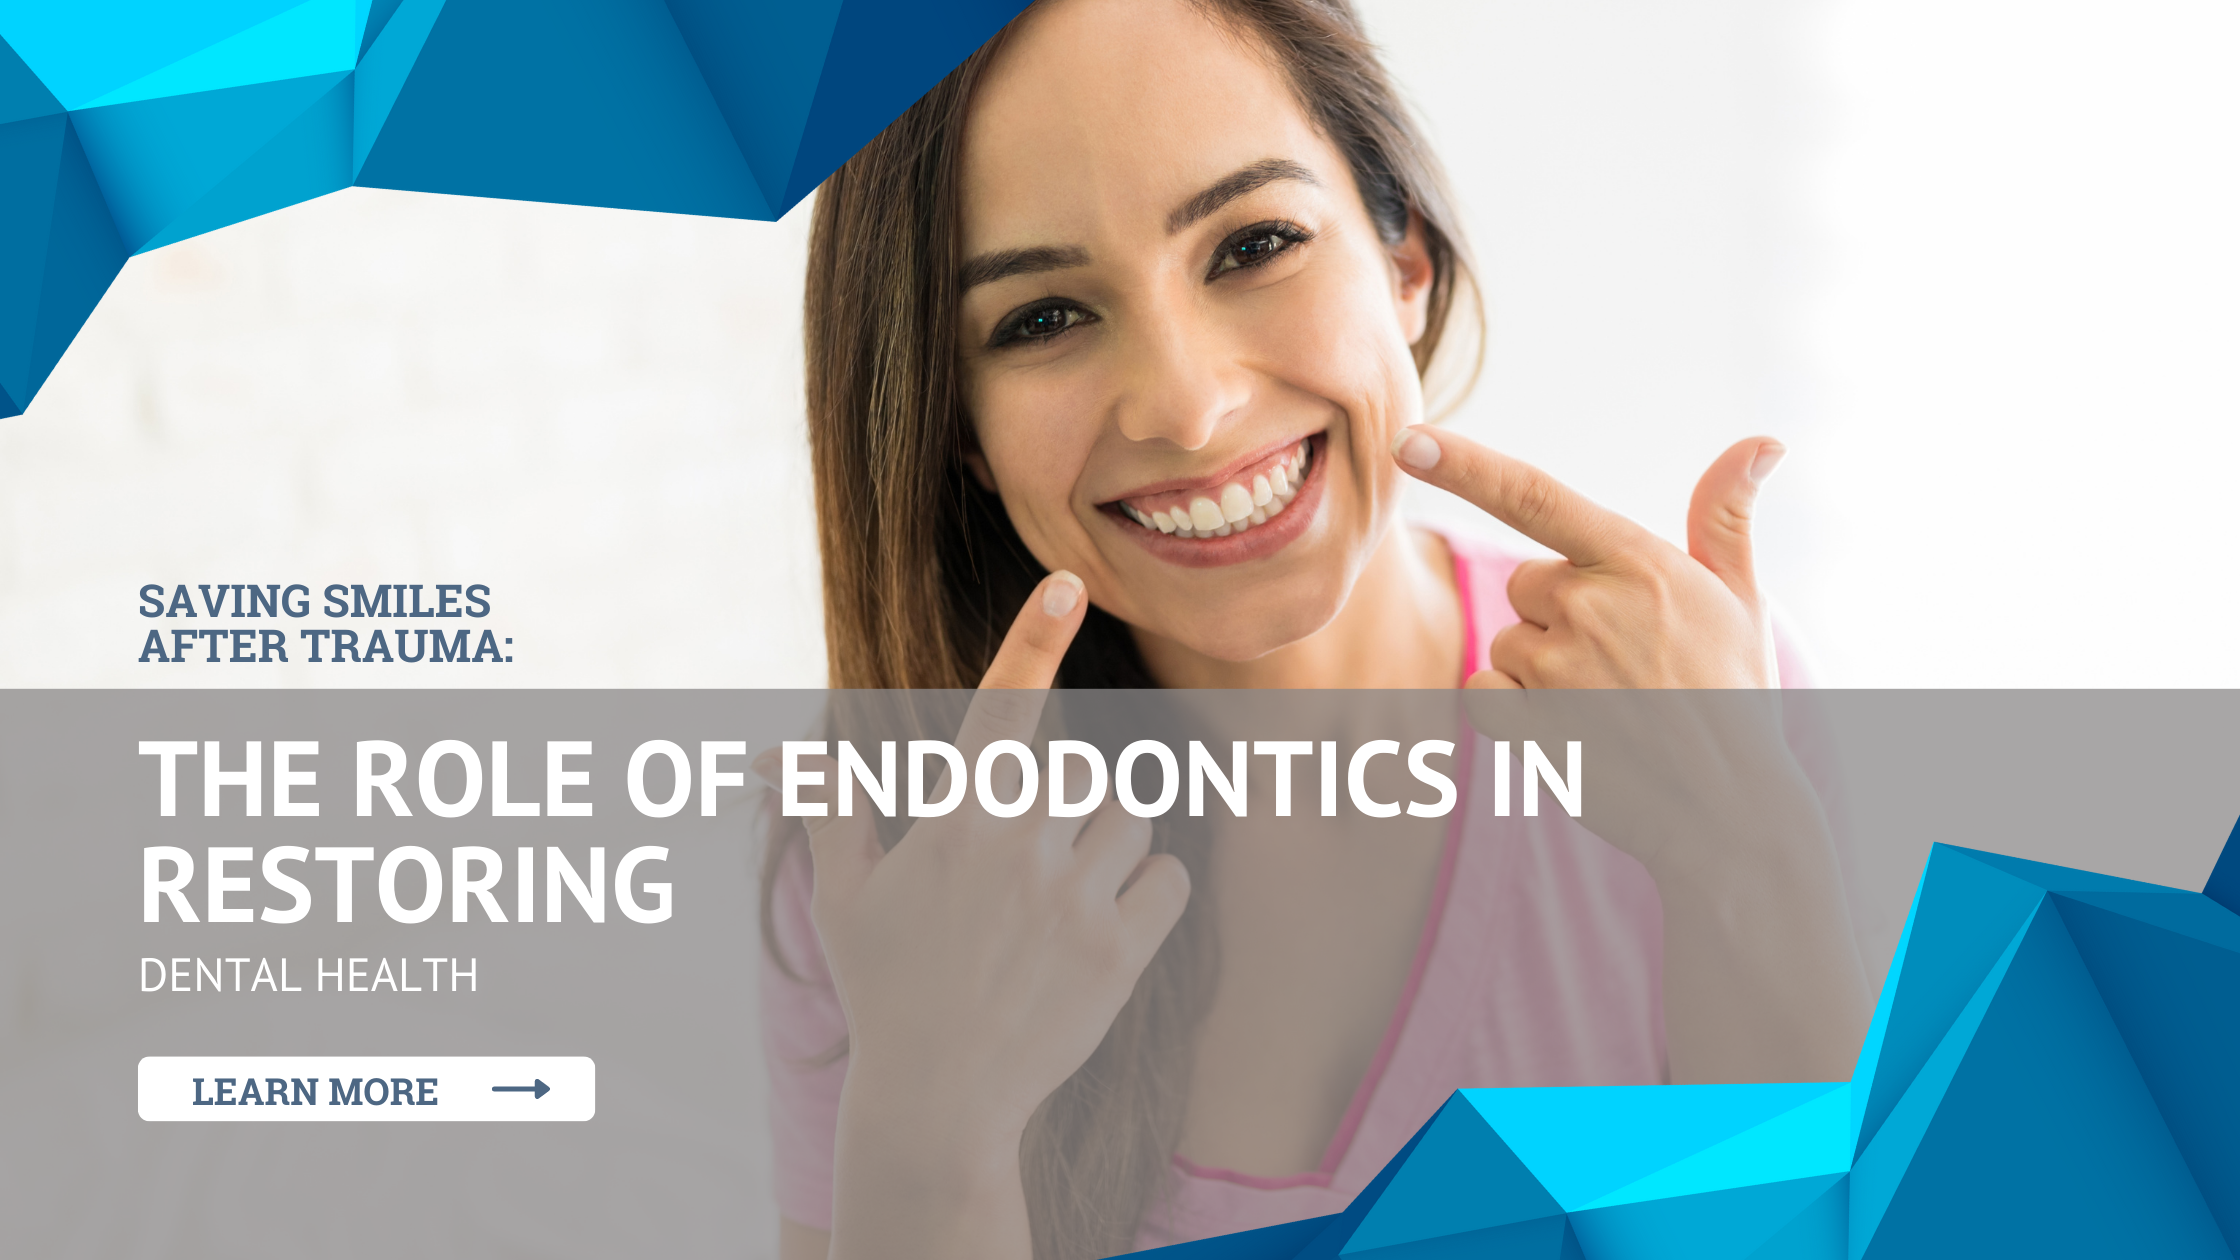 Saving Smiles After Trauma: The Role of Endodontics in Restoring Dental Health